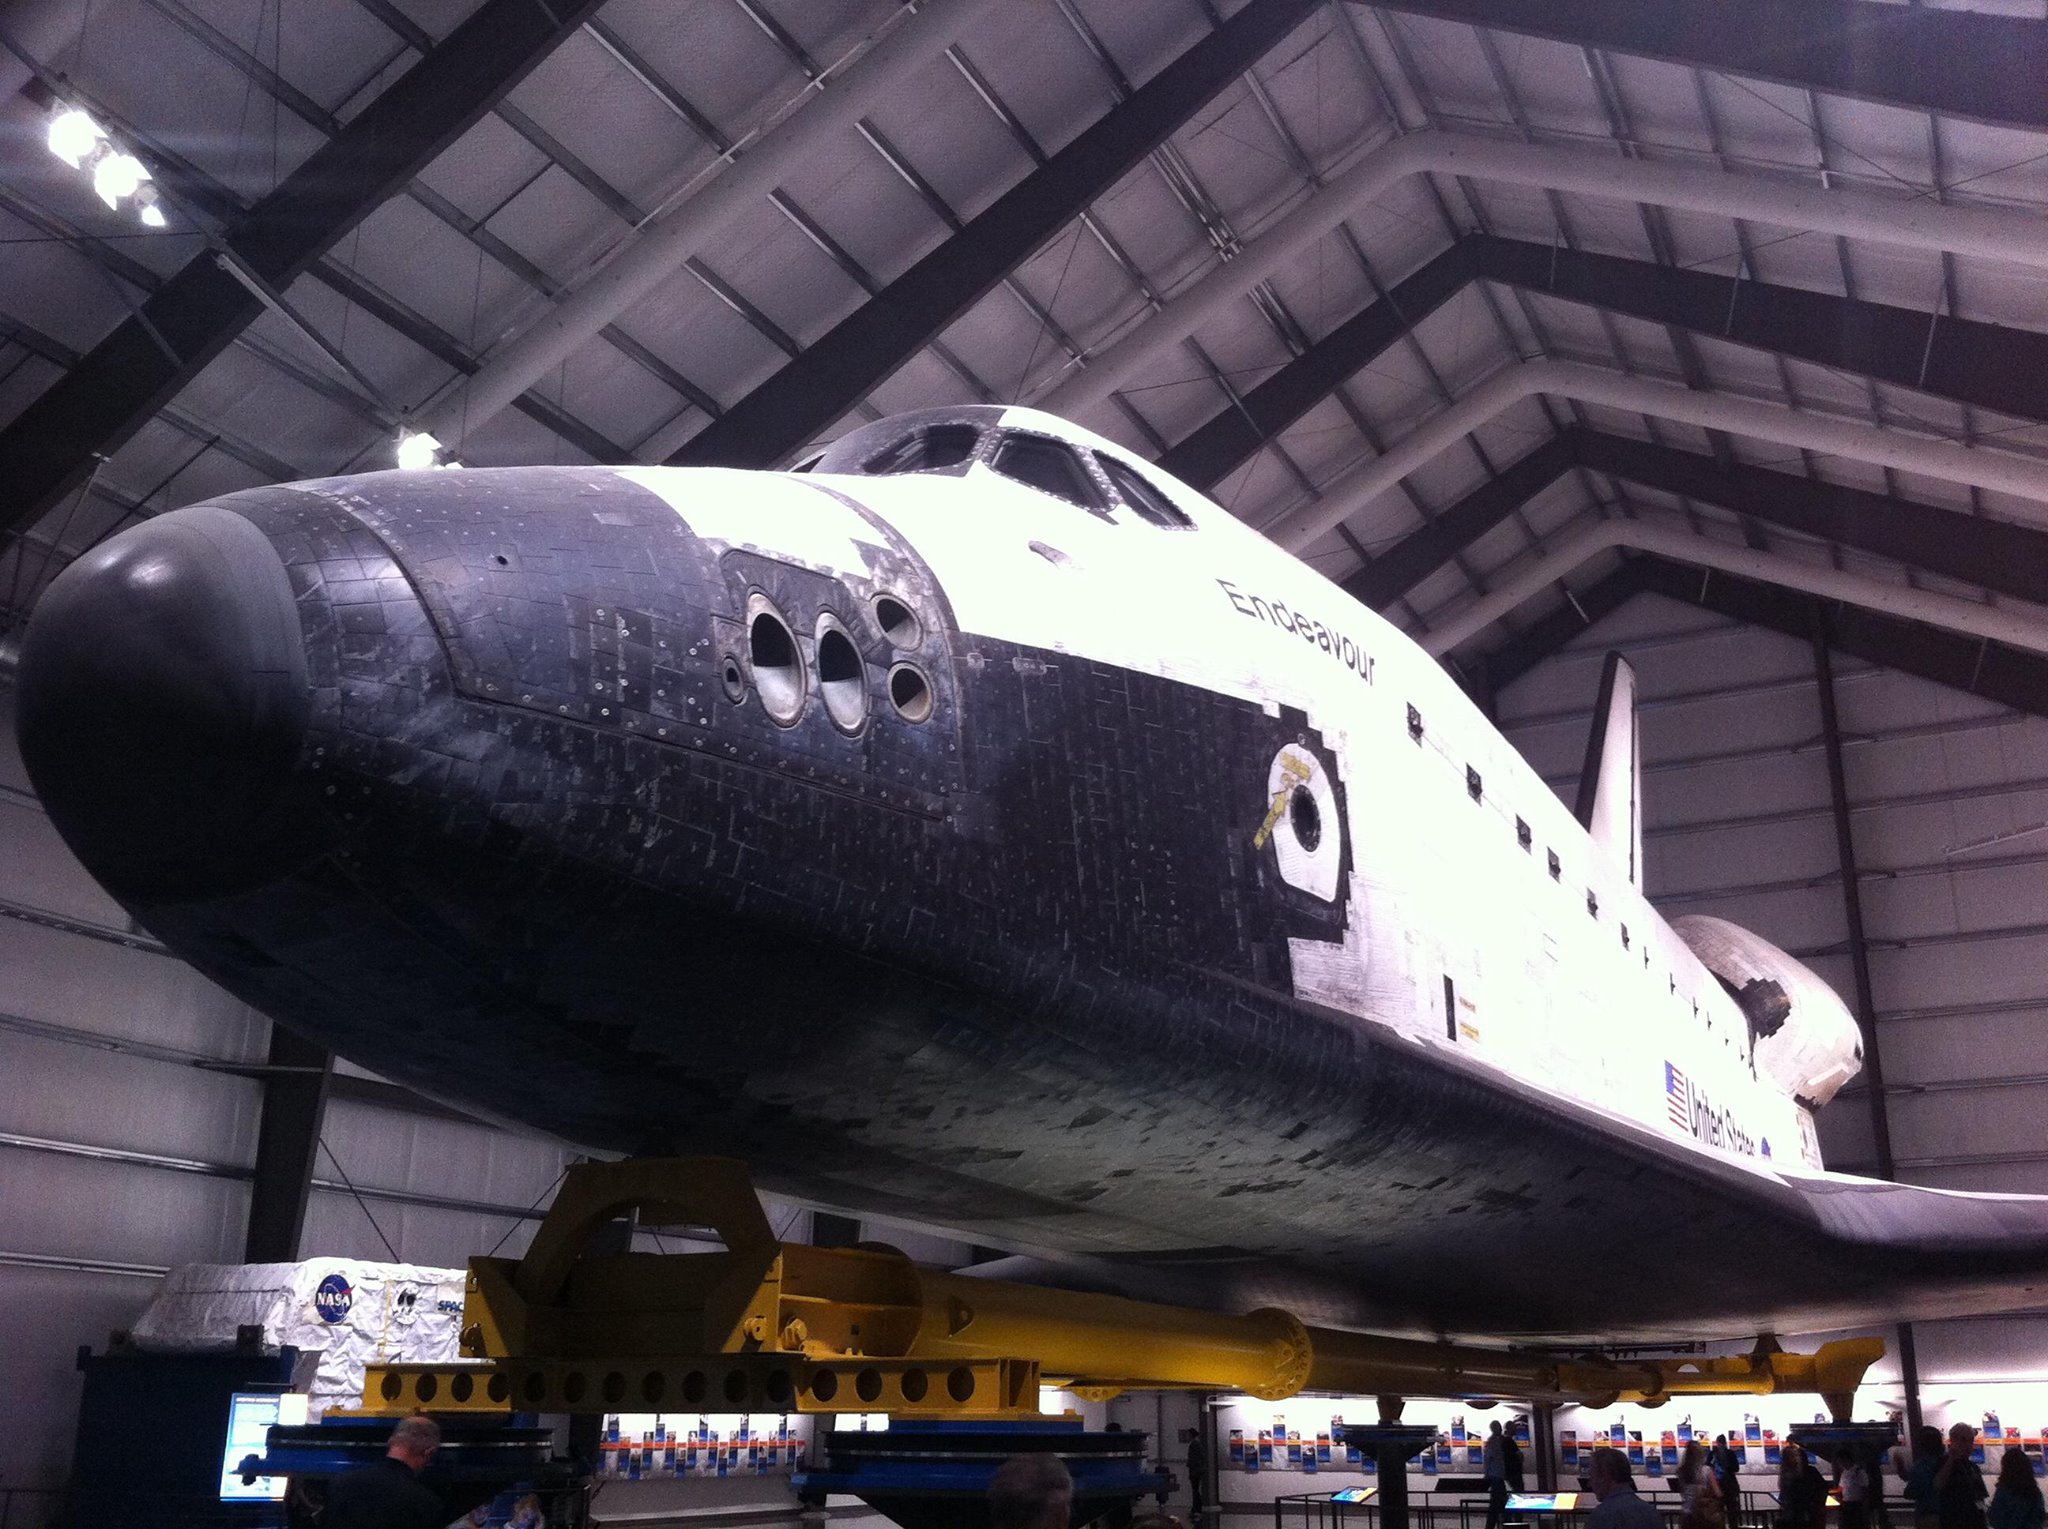 weight of space shuttle endeavour